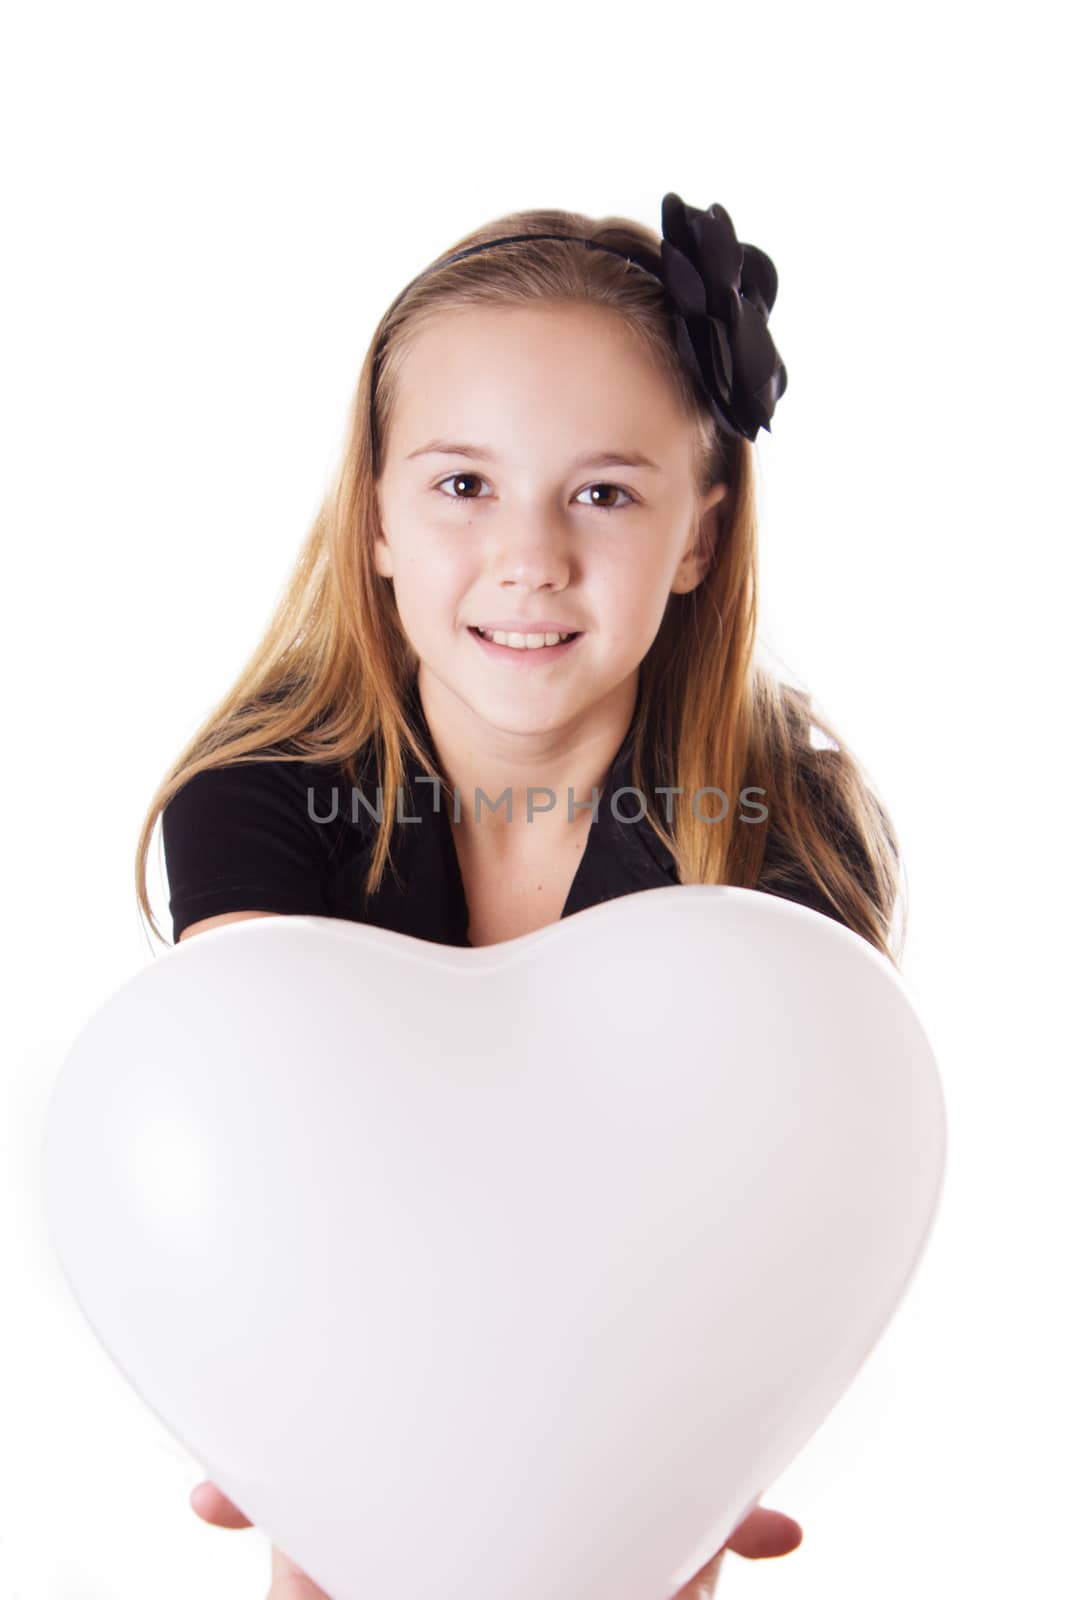 Cute girl holding heart shaped balloon isolated on white